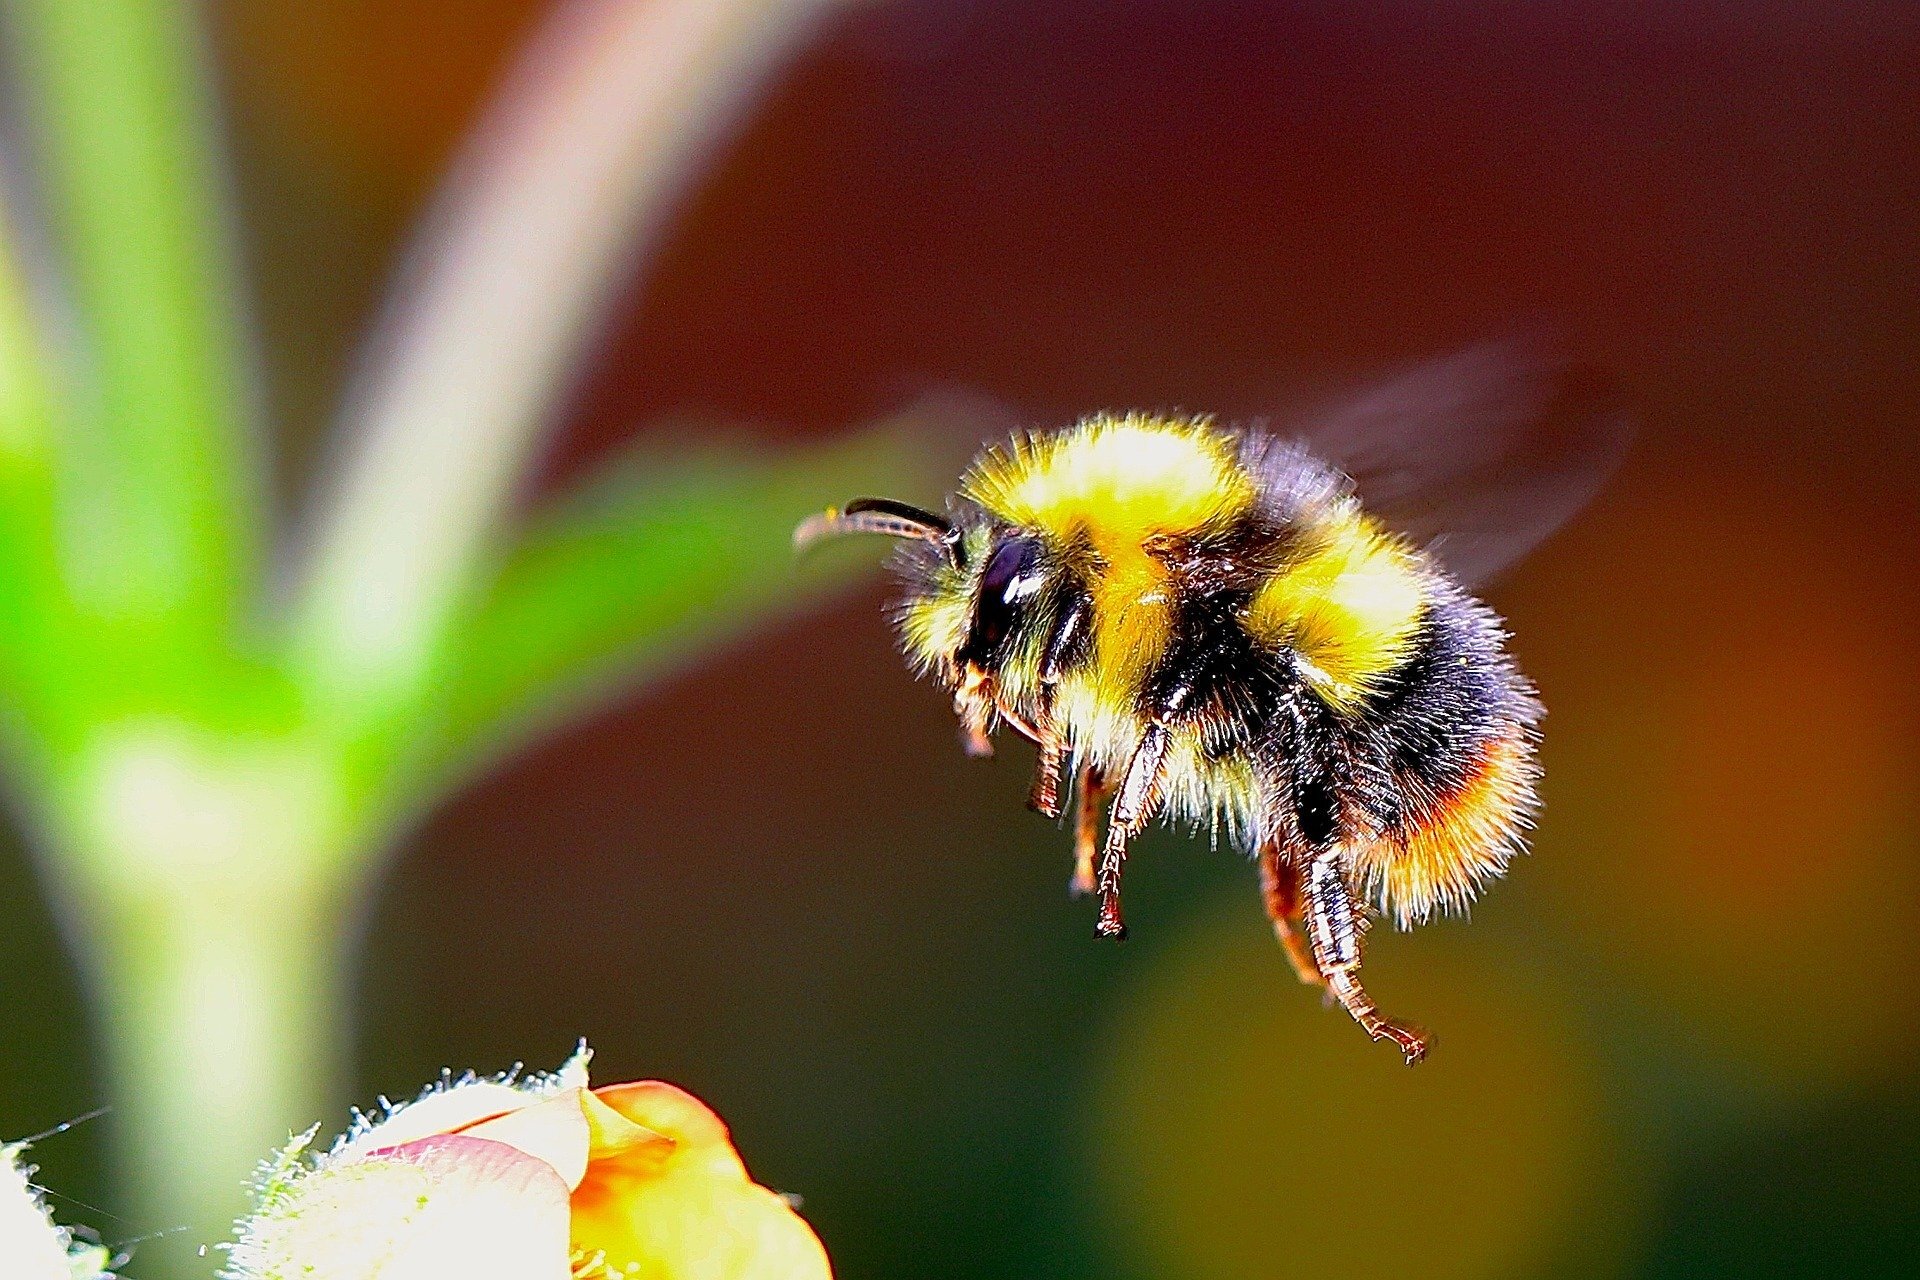 Climate change negatively impacting bumblebees, study finds